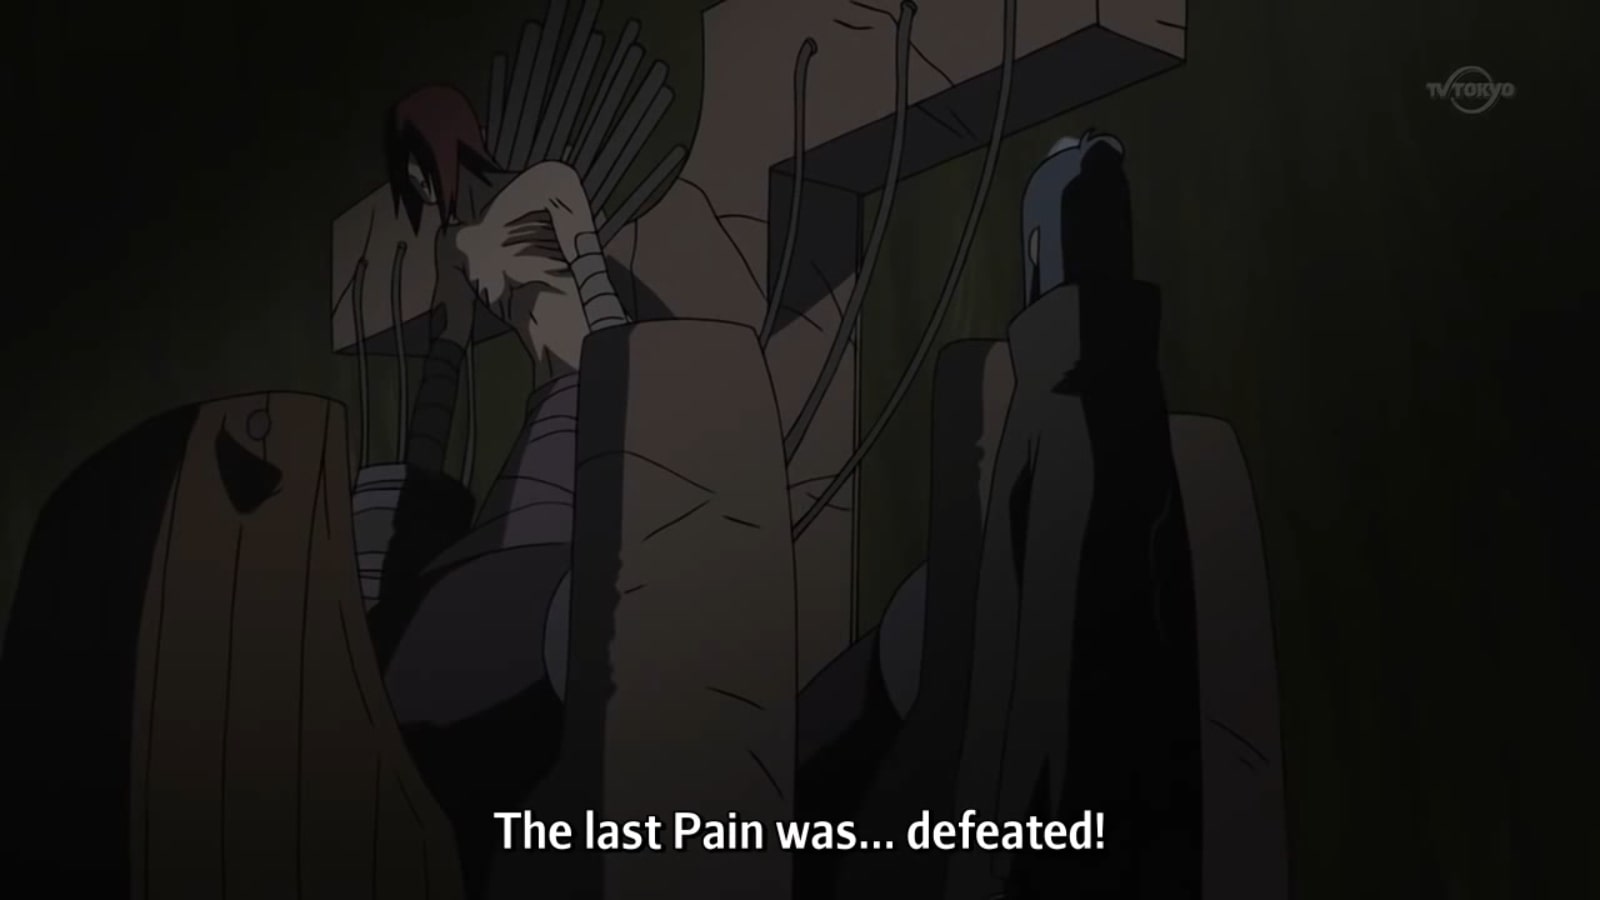 Nagato realizing his six paths of Pain were destroyed